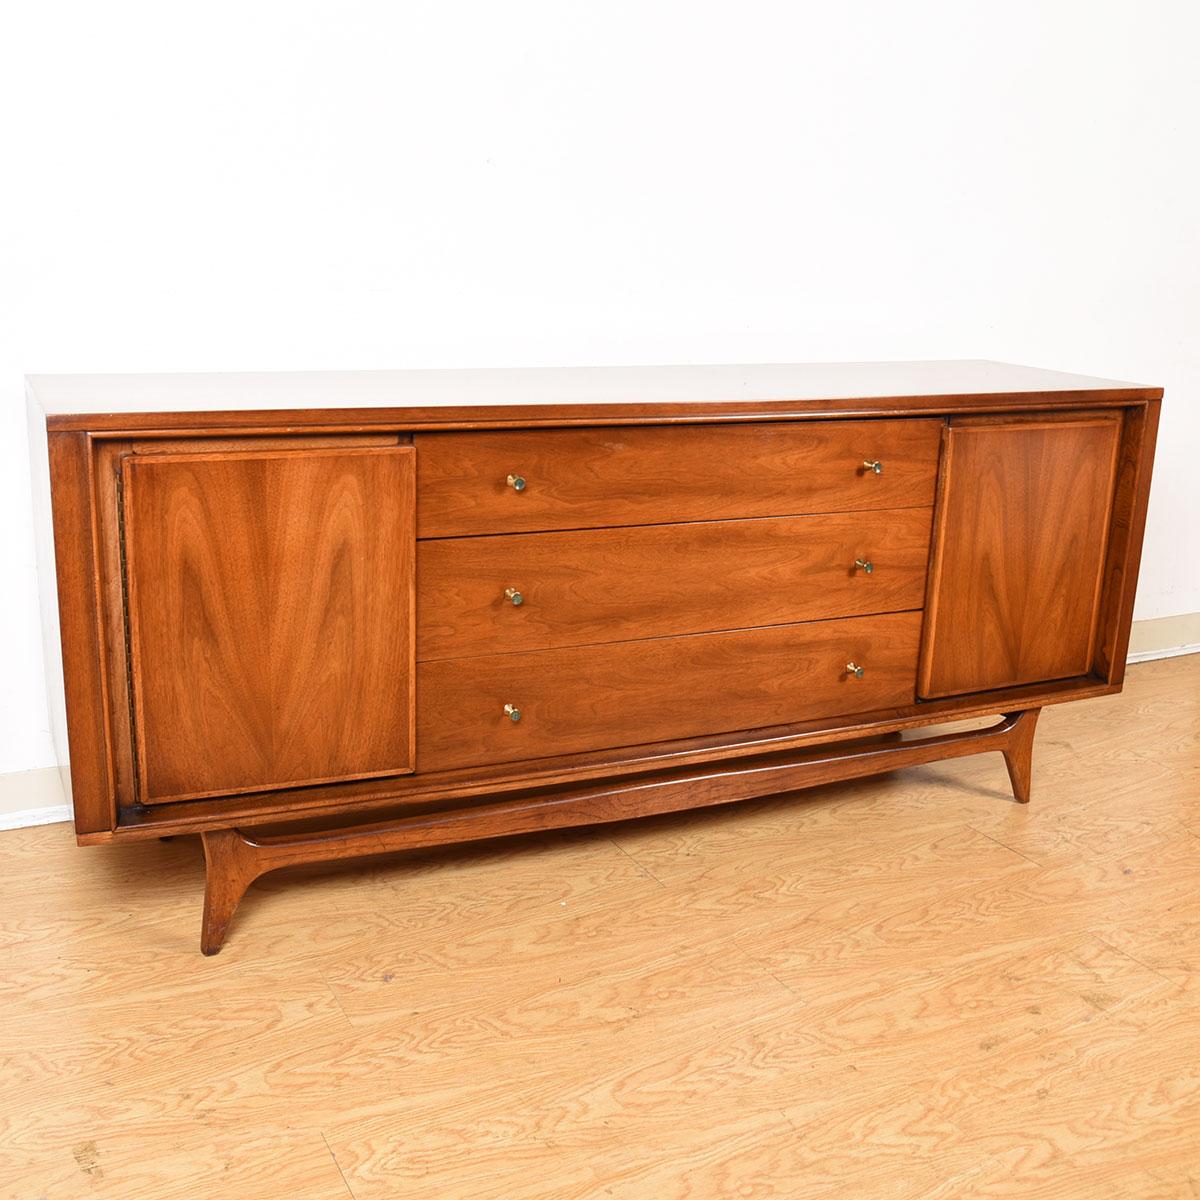 Mid-Century Modern Walnut Sideboard Dresser

Additional Information:
Material: Walnut
Style: Mid-Century Modern
Featured at Kensington:
This handsome walnut MCM piece is by the notable American furniture manufacturer Kent Coffey.
Tons of